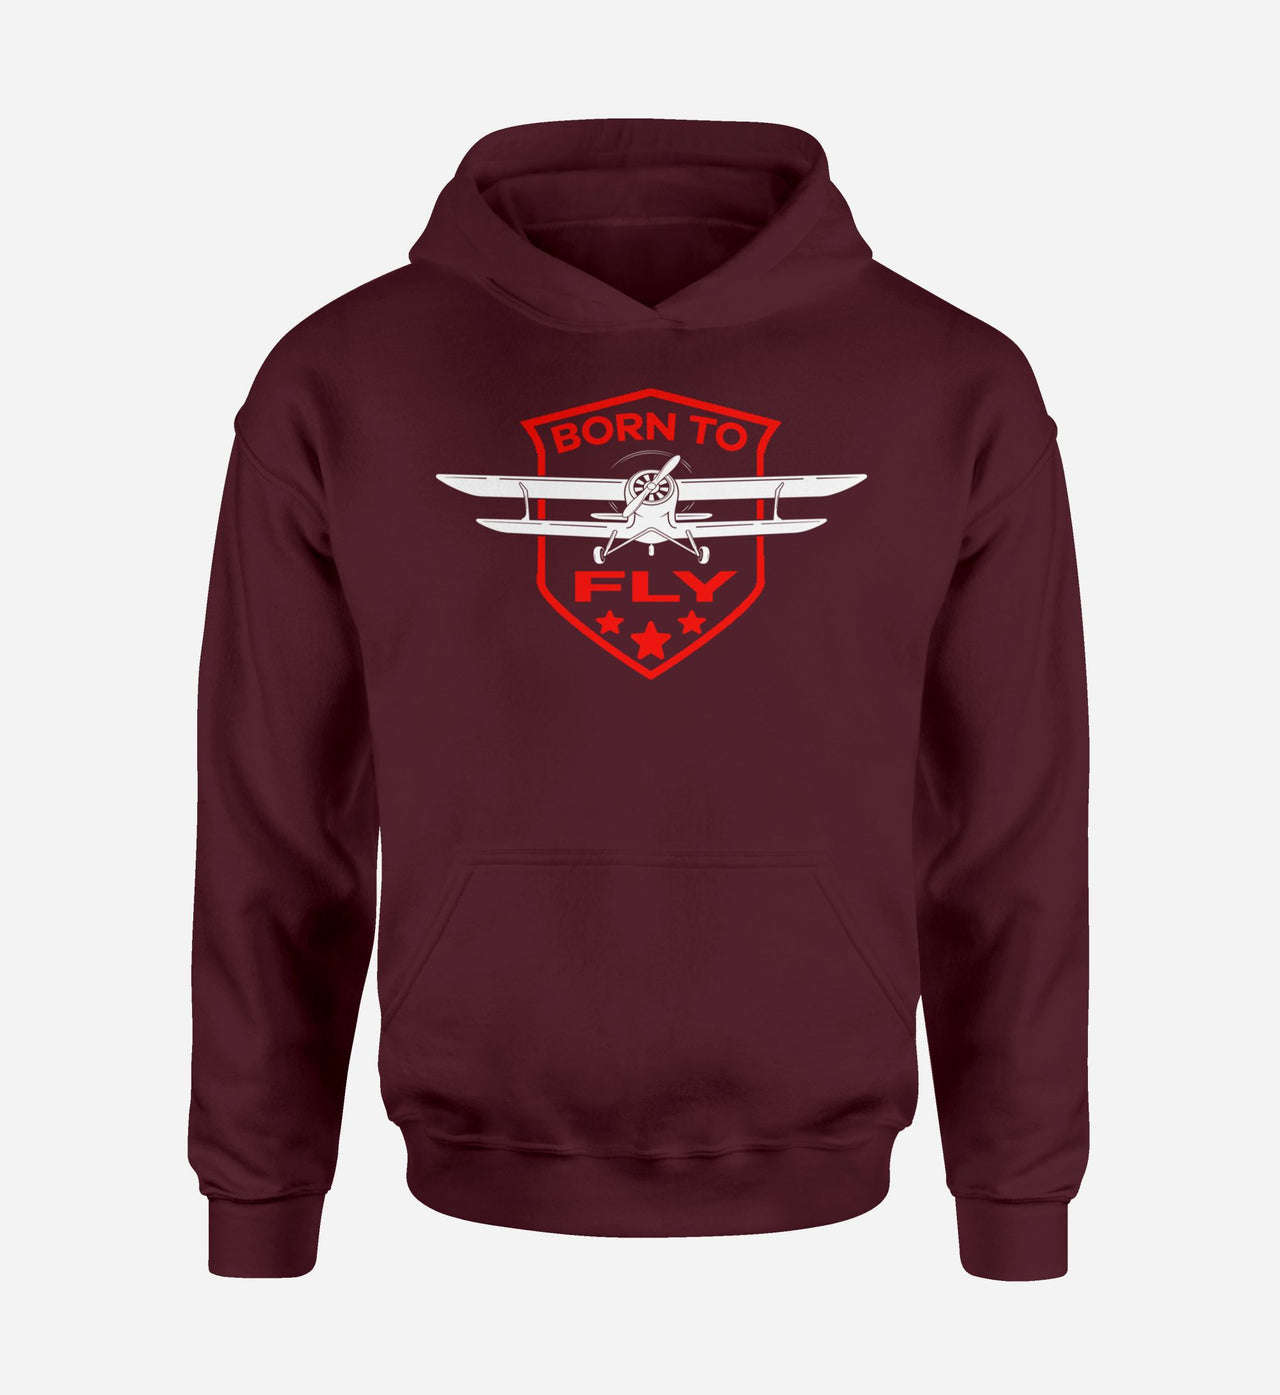 Born To Fly Designed Designed Hoodies